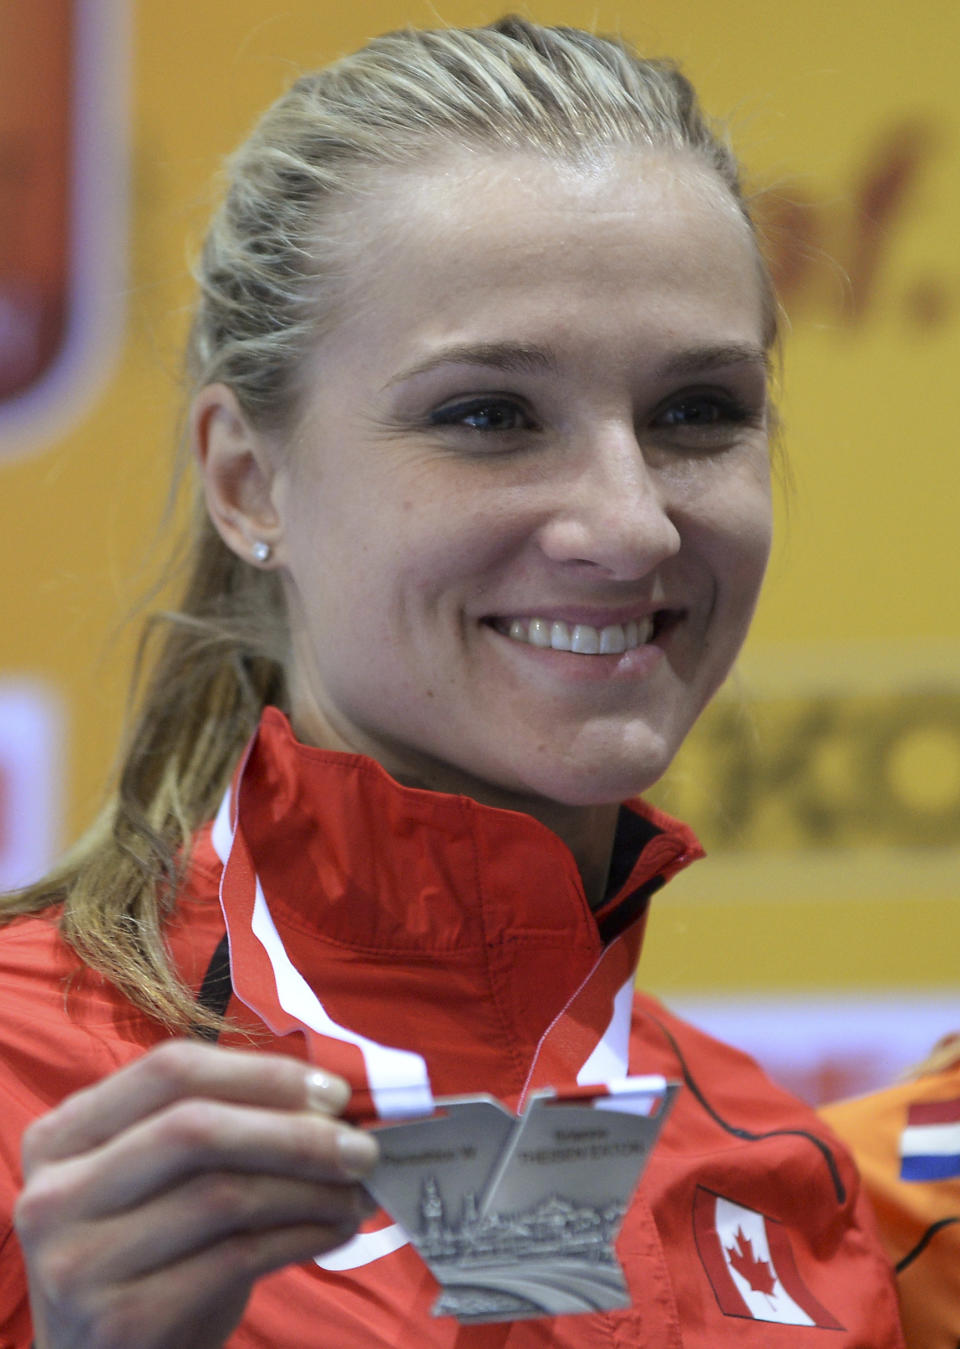 Canada's Brianne Theisen Eaton sports her silver medal after the women's pentathlon during the Athletics Indoor World Championships in Sopot, Poland, Friday, March 7, 2014. (AP Photo/Alik Keplicz)